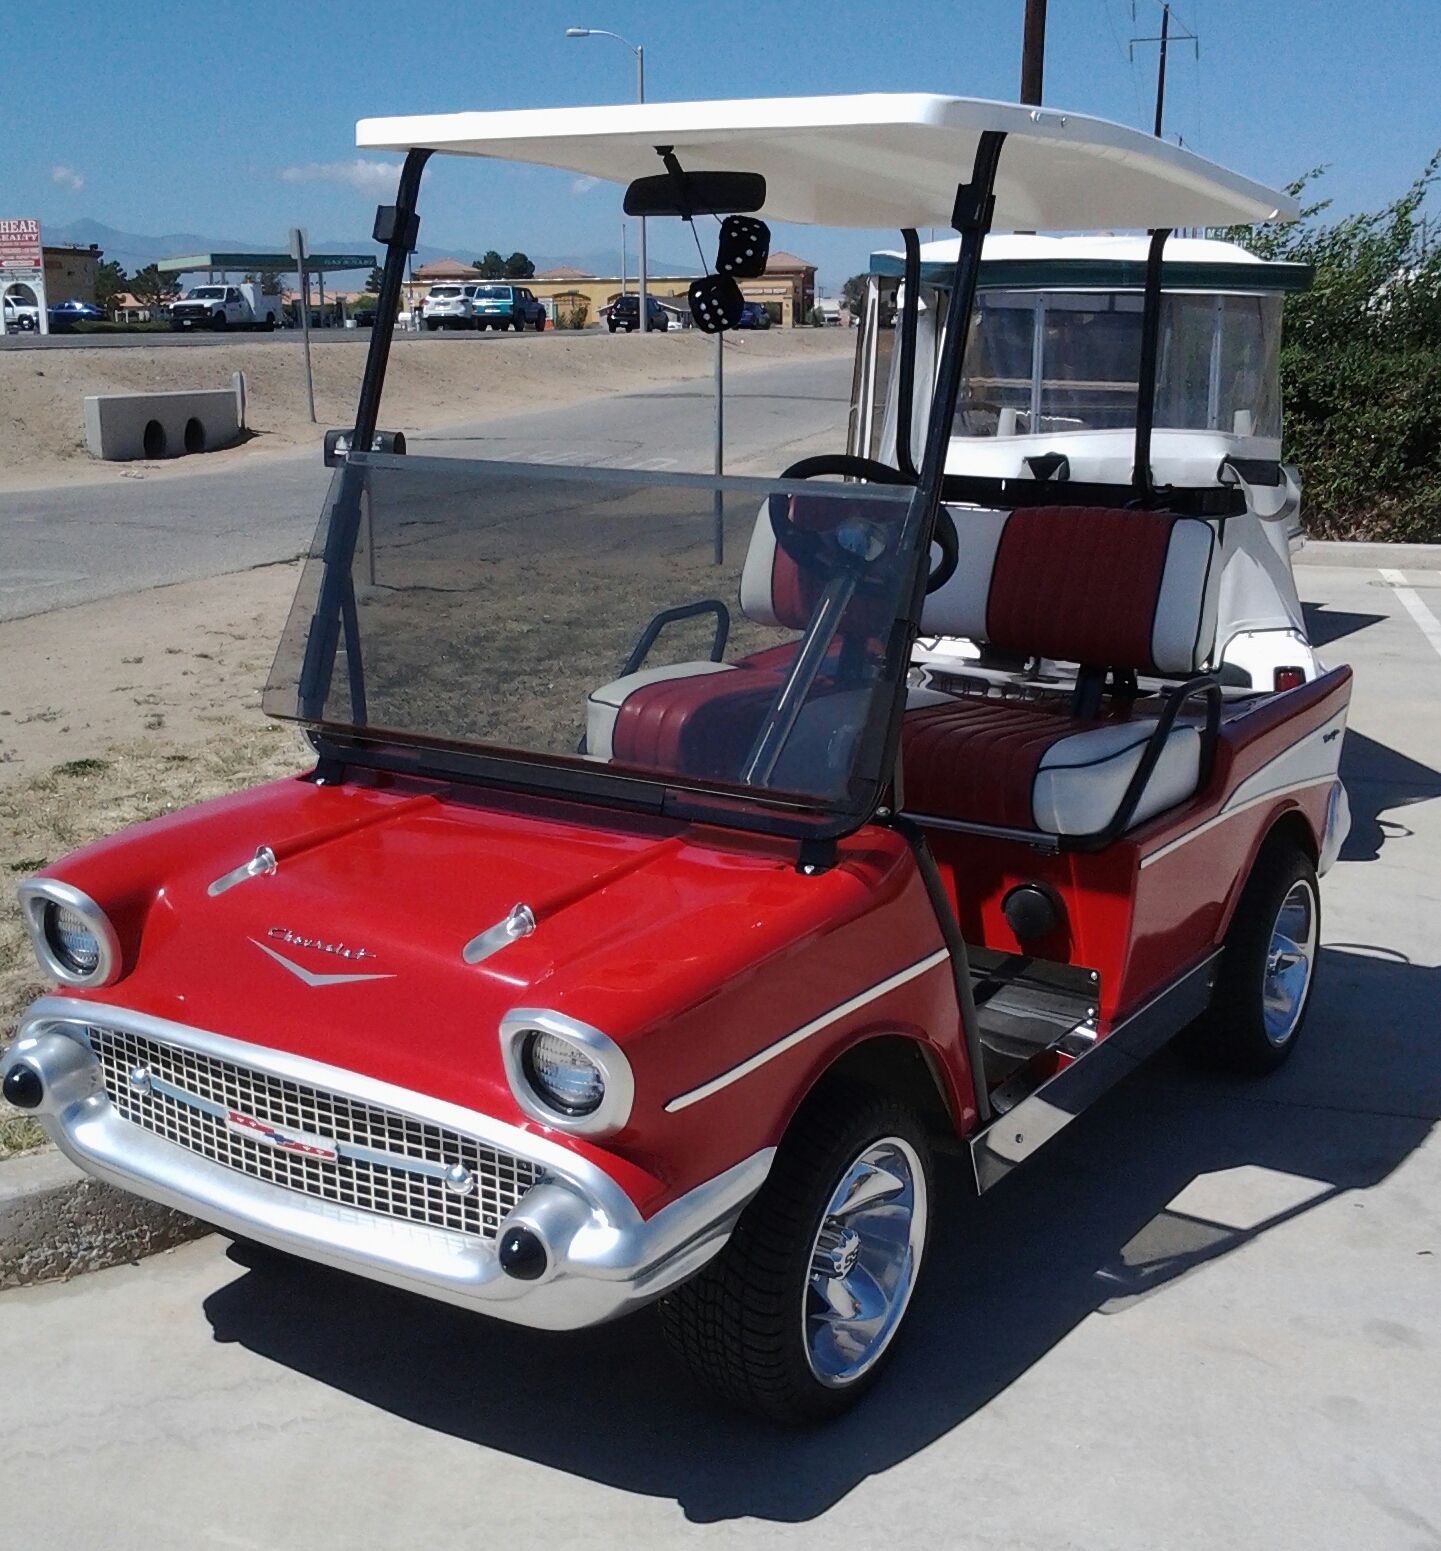 57 chevy golf cart bulit by Lifestyle Custom Carts in Victorville CA ...